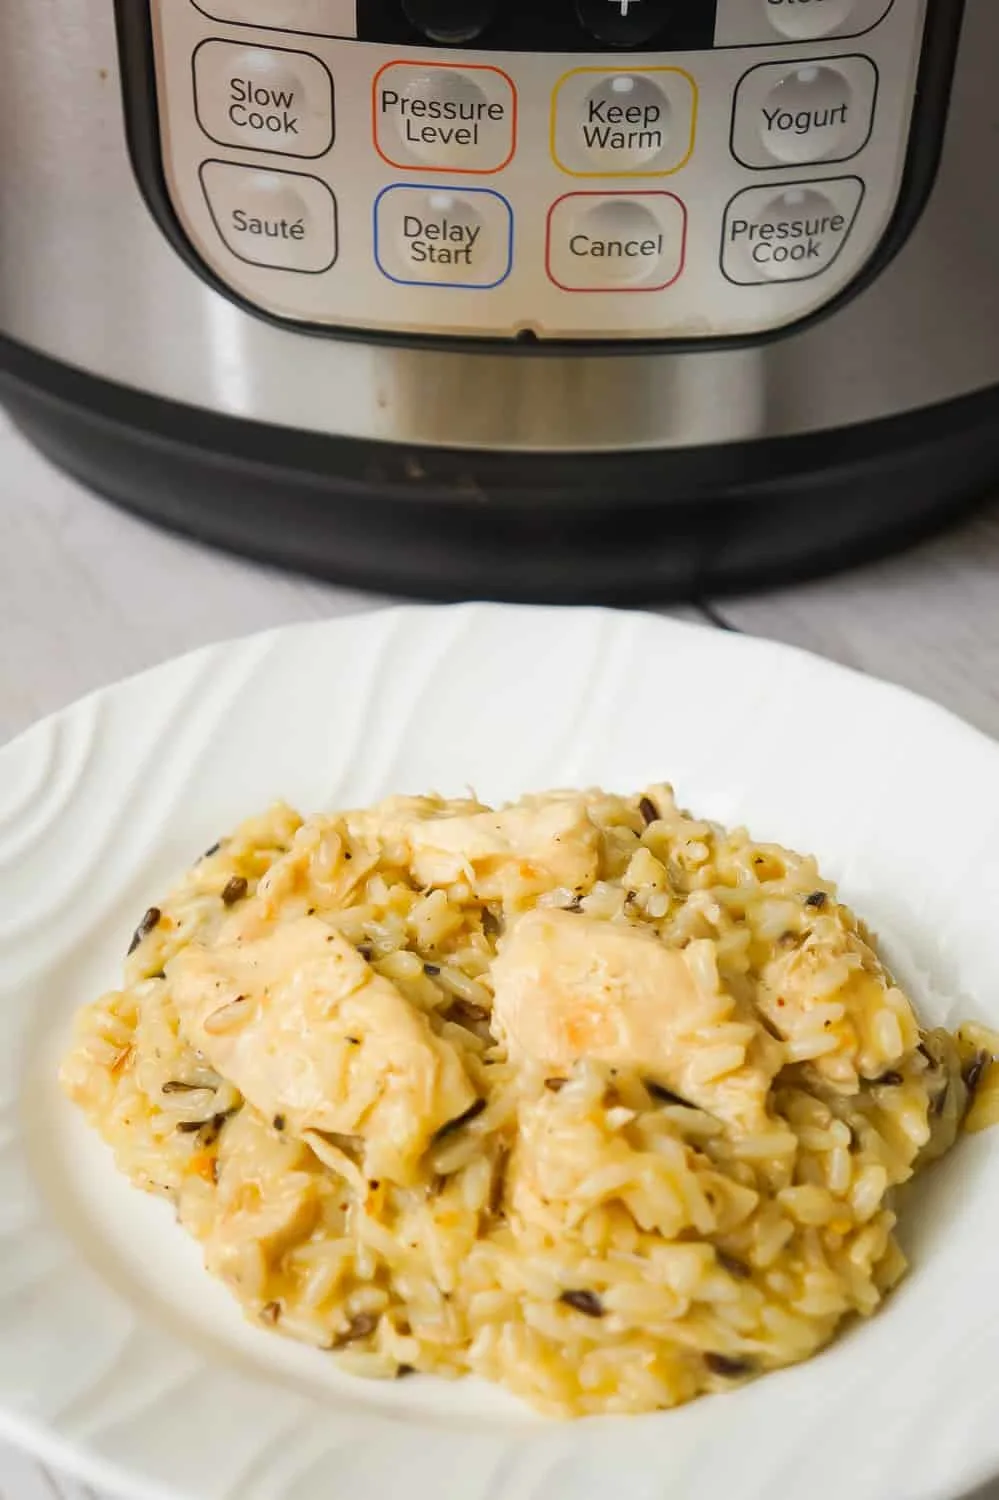 Instant Pot Lemon Pepper Chicken and Rice is an easy and delicious chicken dinner recipe. This creamy long grain and wild rice dish is loaded with tender chicken breast chunks.